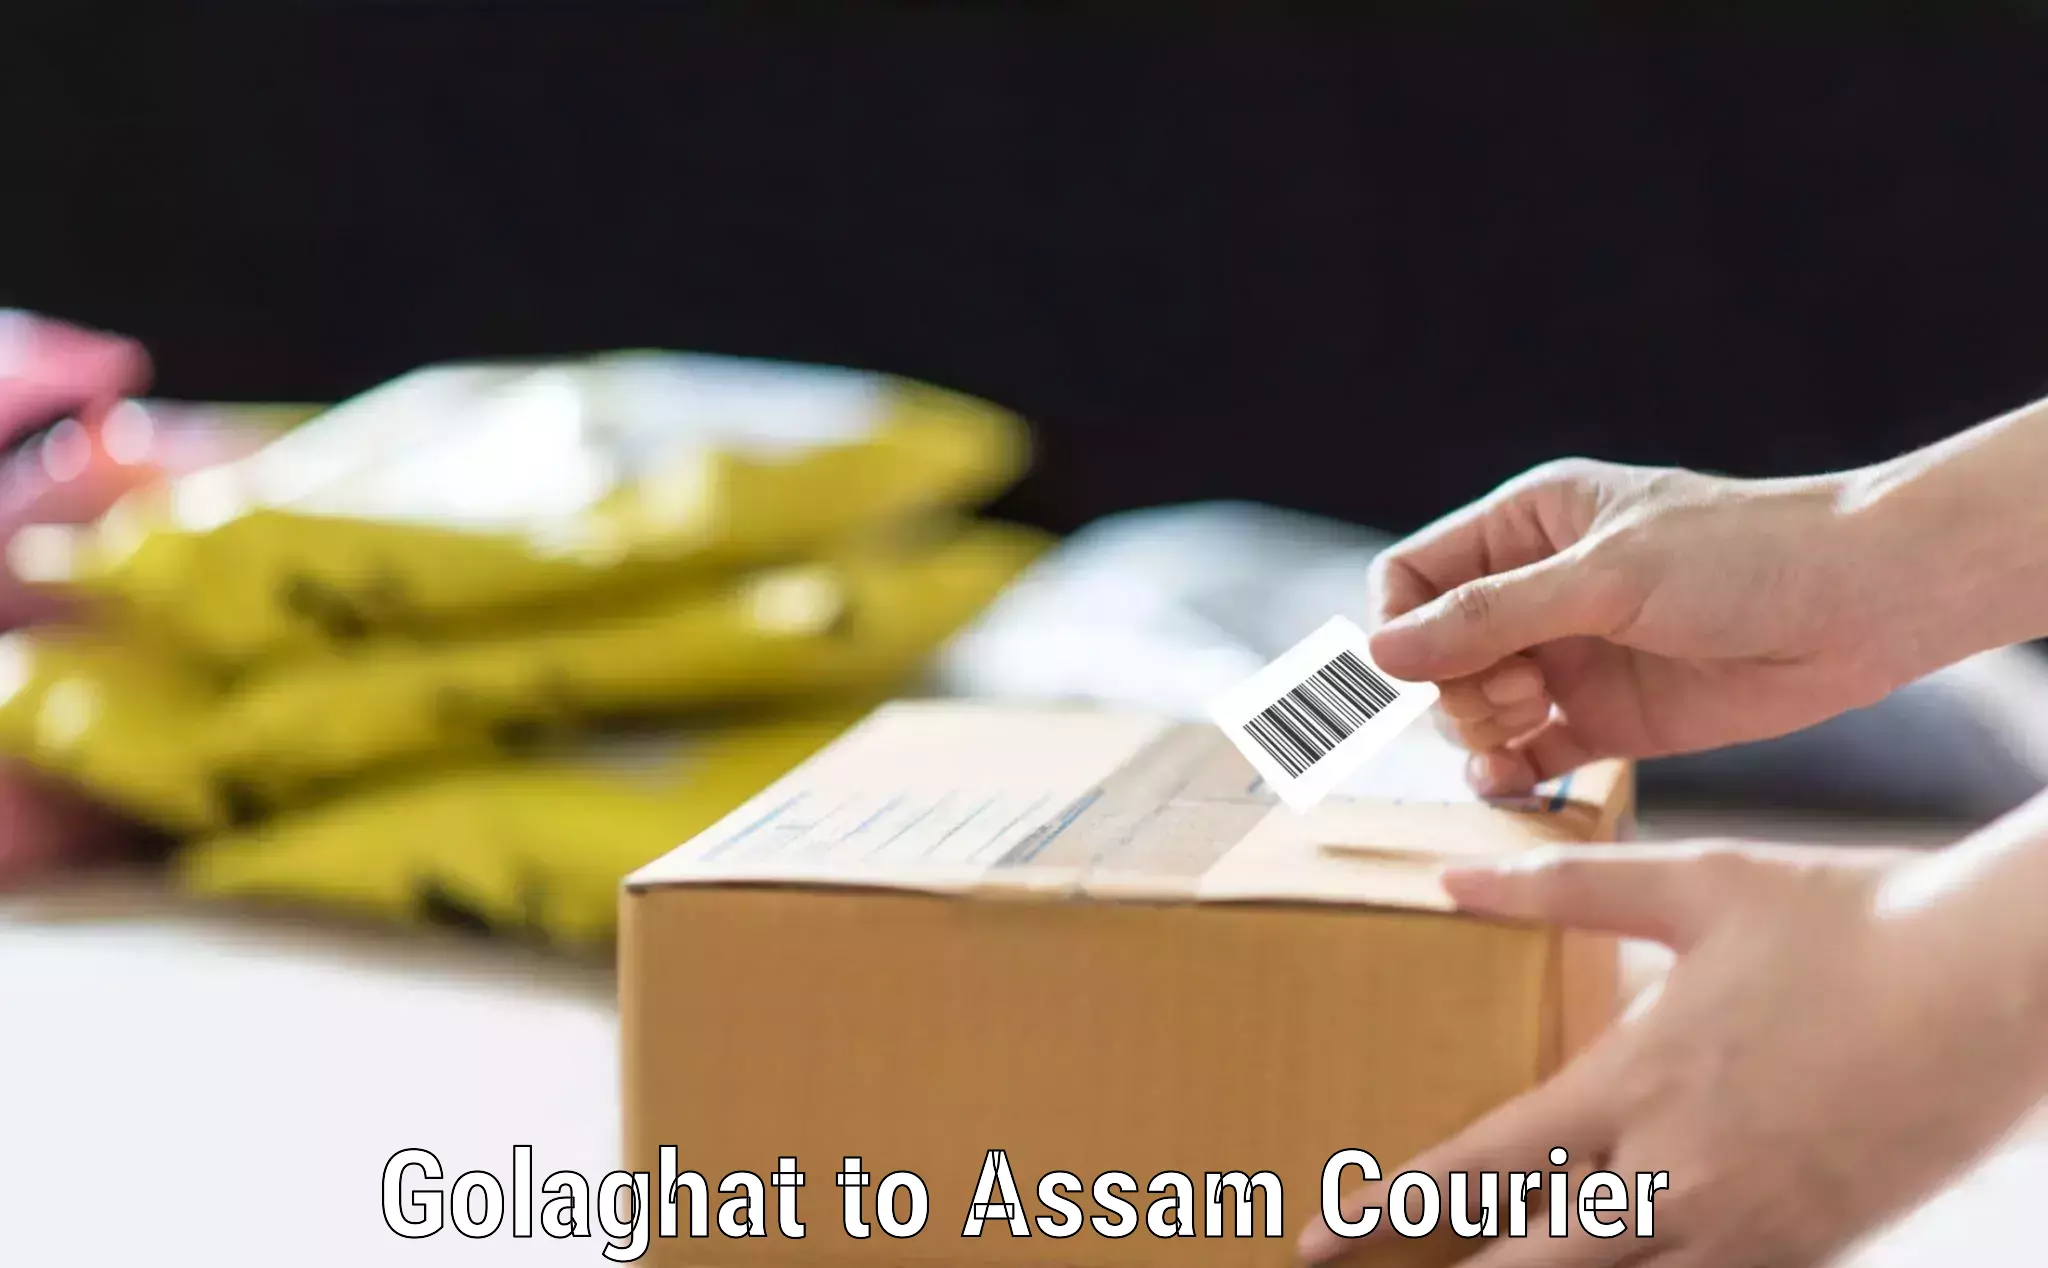 Online luggage shipping booking Golaghat to Assam